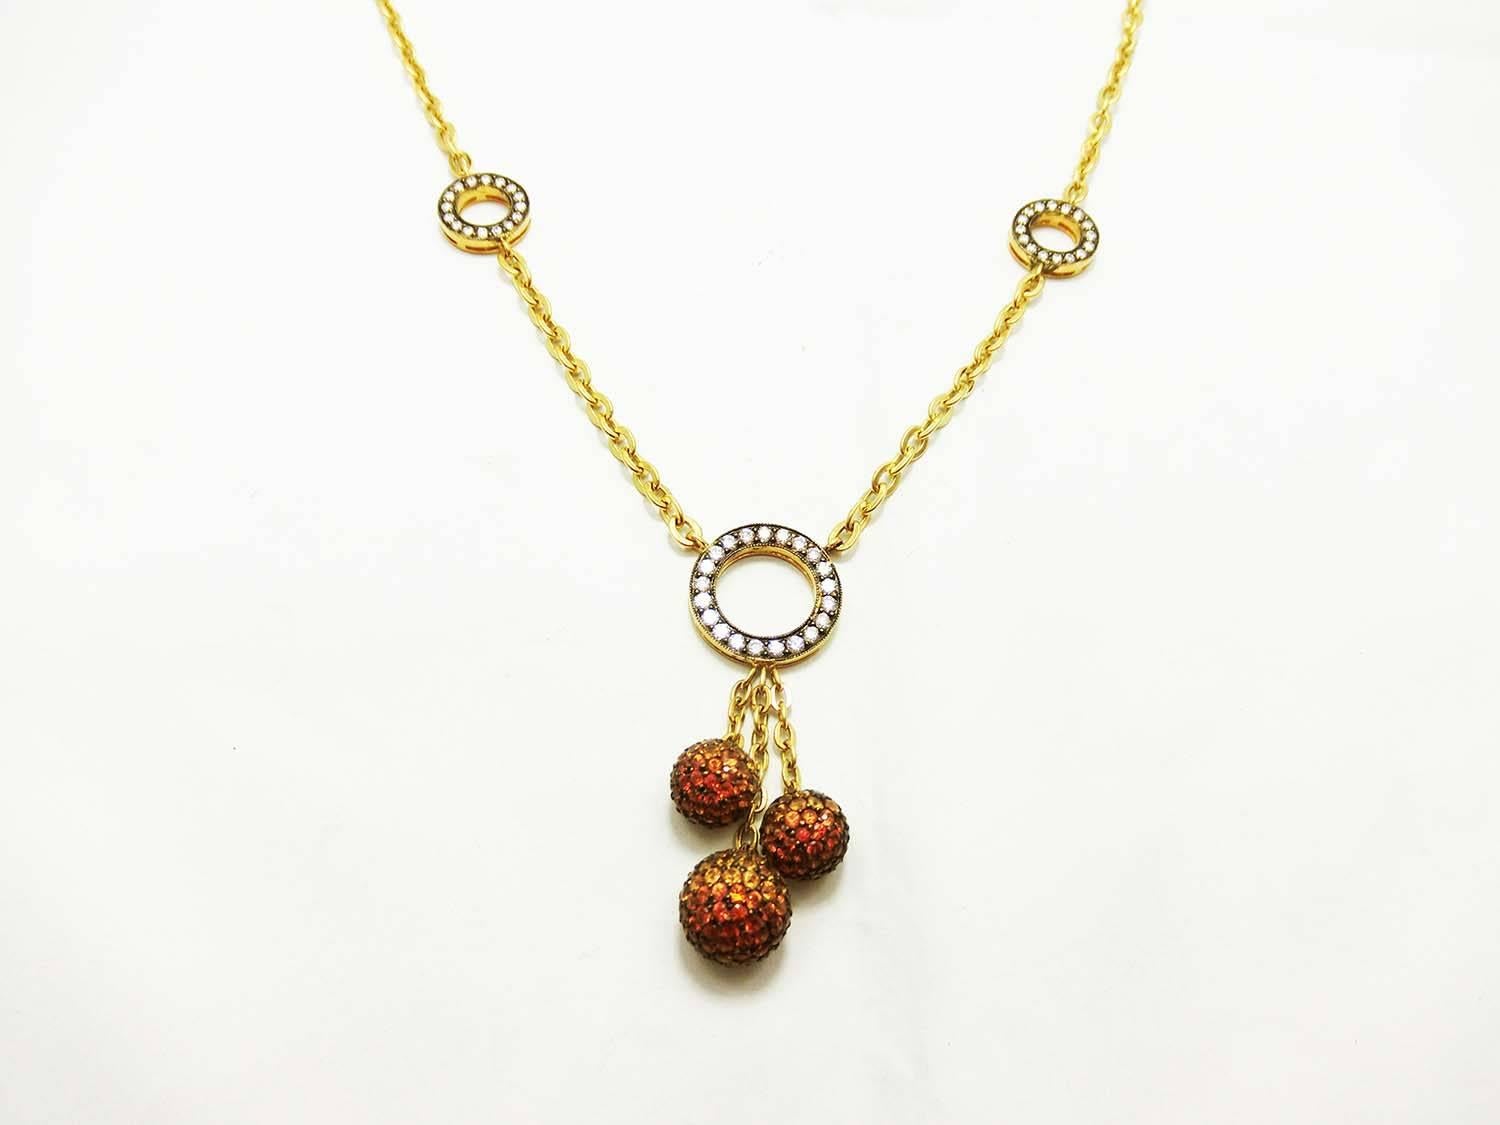 3 Balls necklace made in 18k Yellow gold.We design as the harmony symbolic.
Orange and Yellow Sapphire 4.13 ct 
Diamond 0.96 ct H VS quality
The length is 16.5 inches but you can use as 15 inches,16 inches and 16.5 inches .Because we have a small